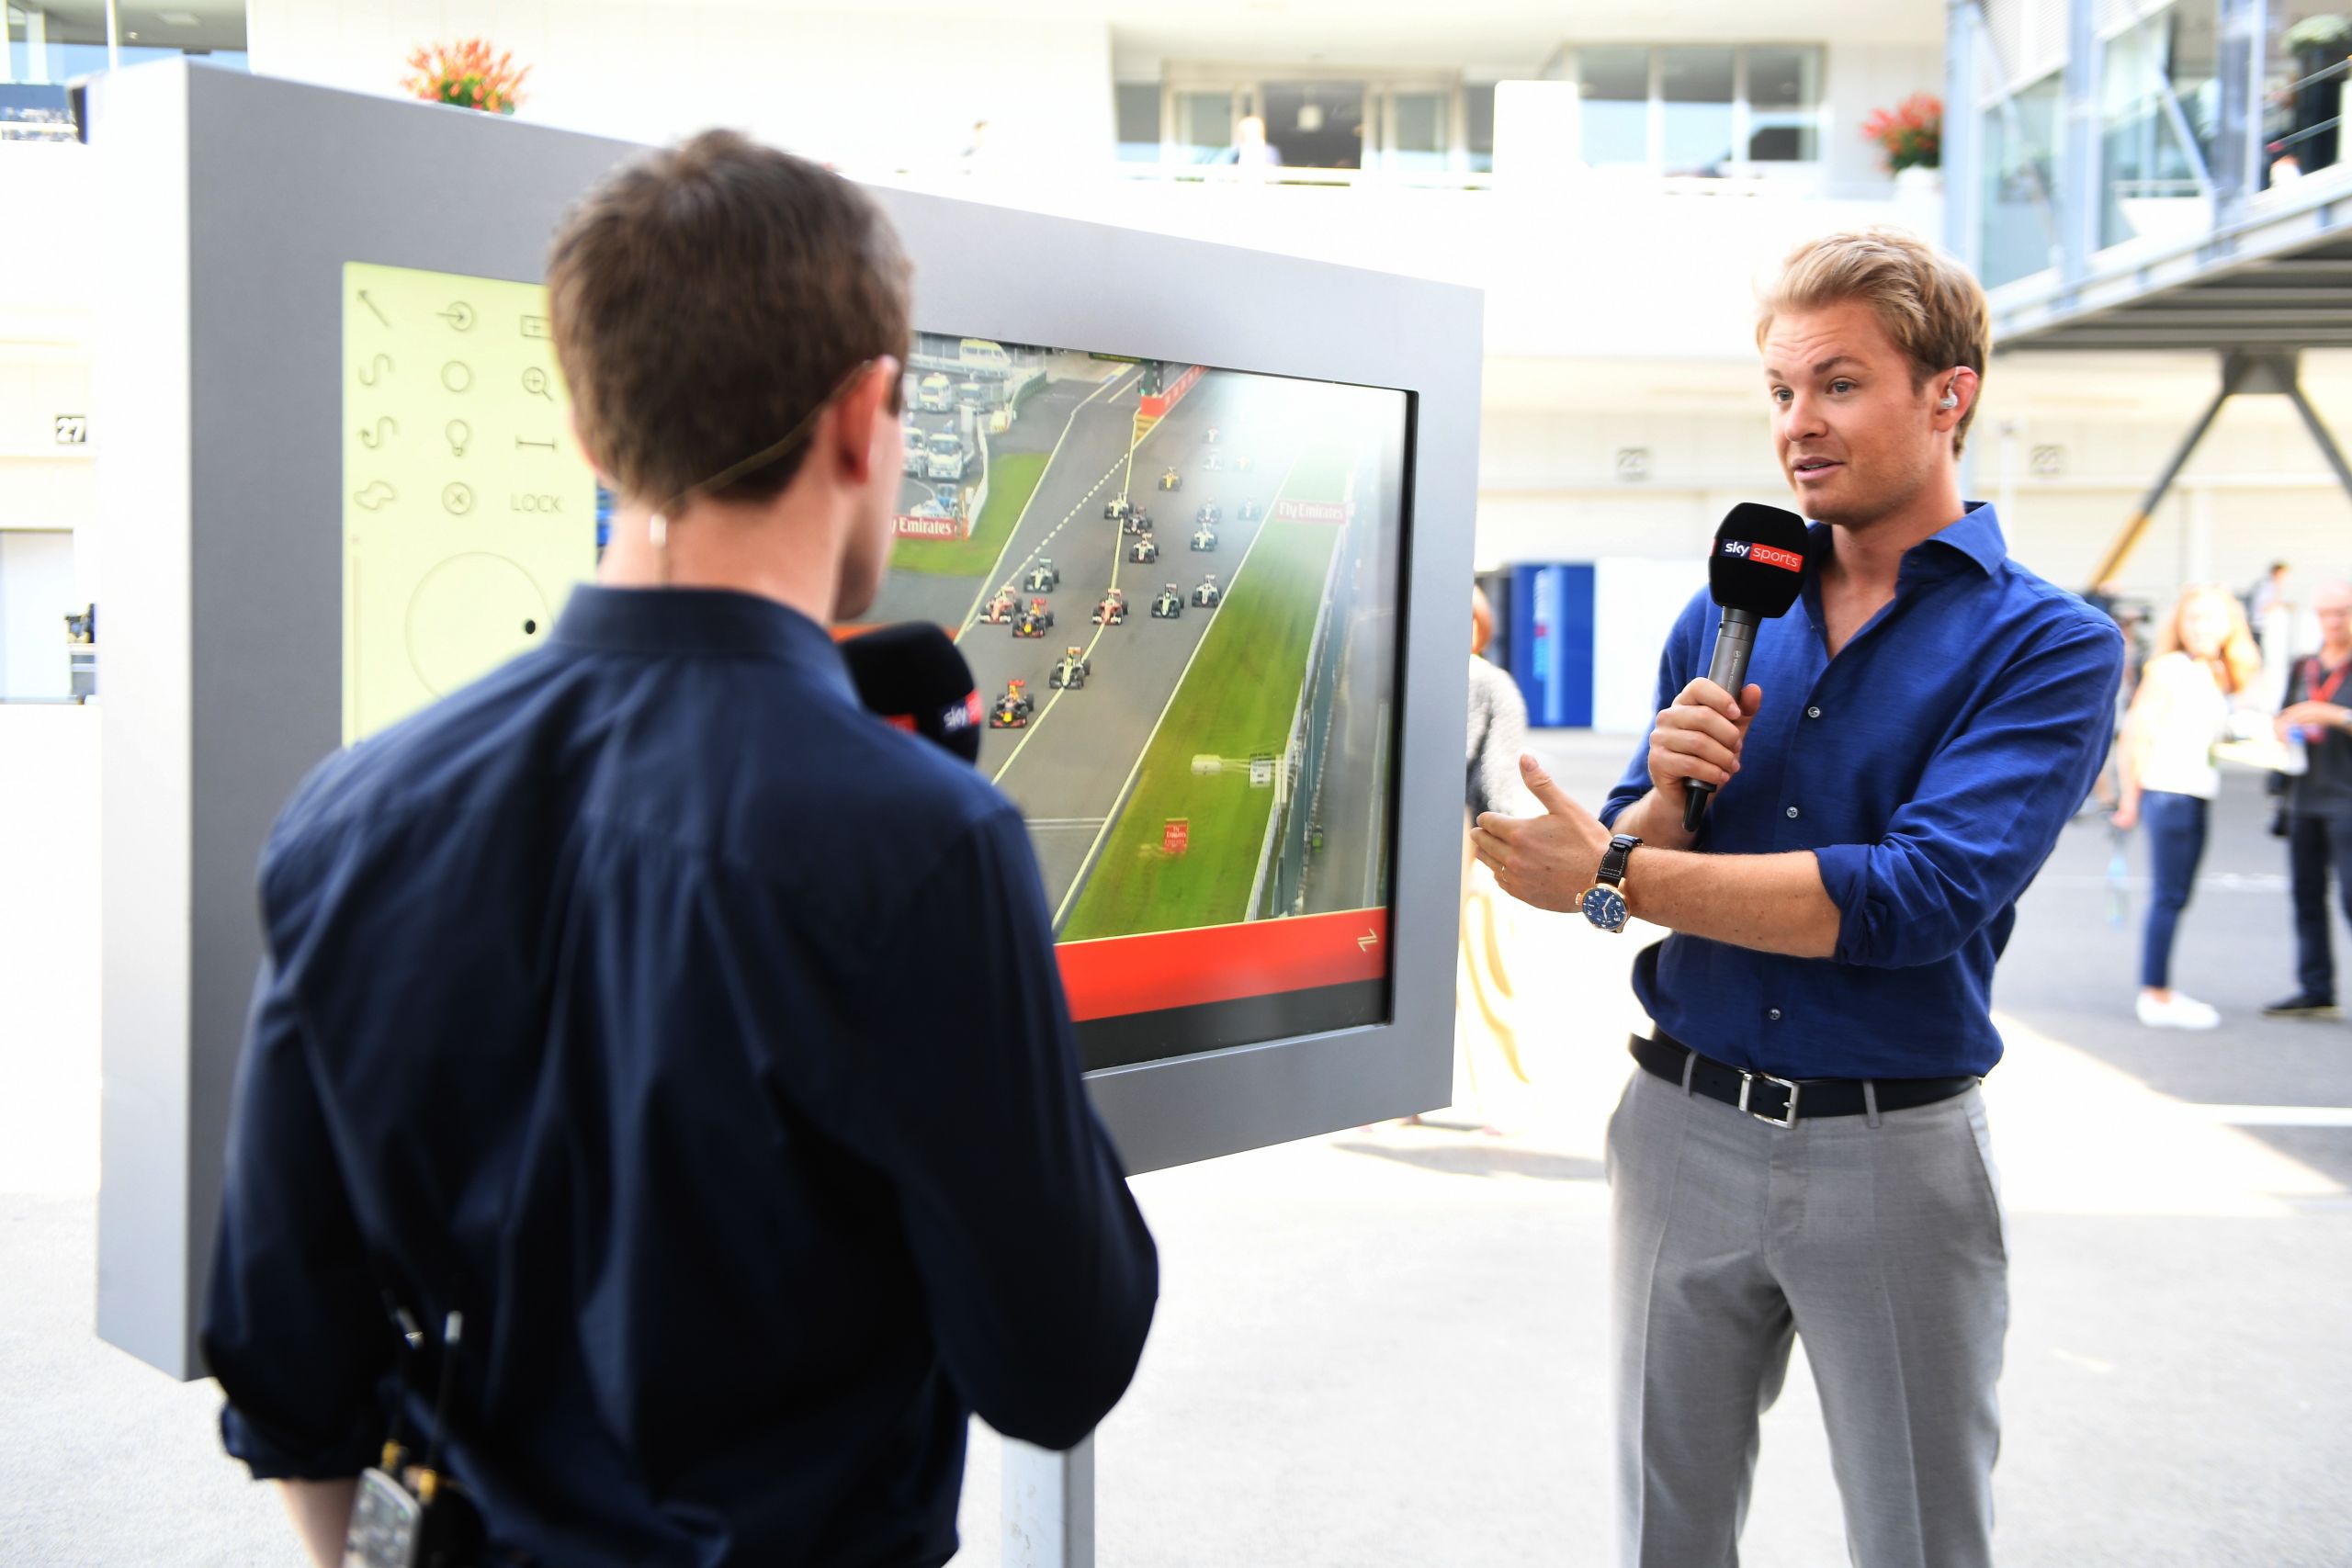 The new home of Sky Sports Formula 1 motorsport enters its first season: Sky Formula 1® shows / Nico Rosberg becomes the new Sky expert